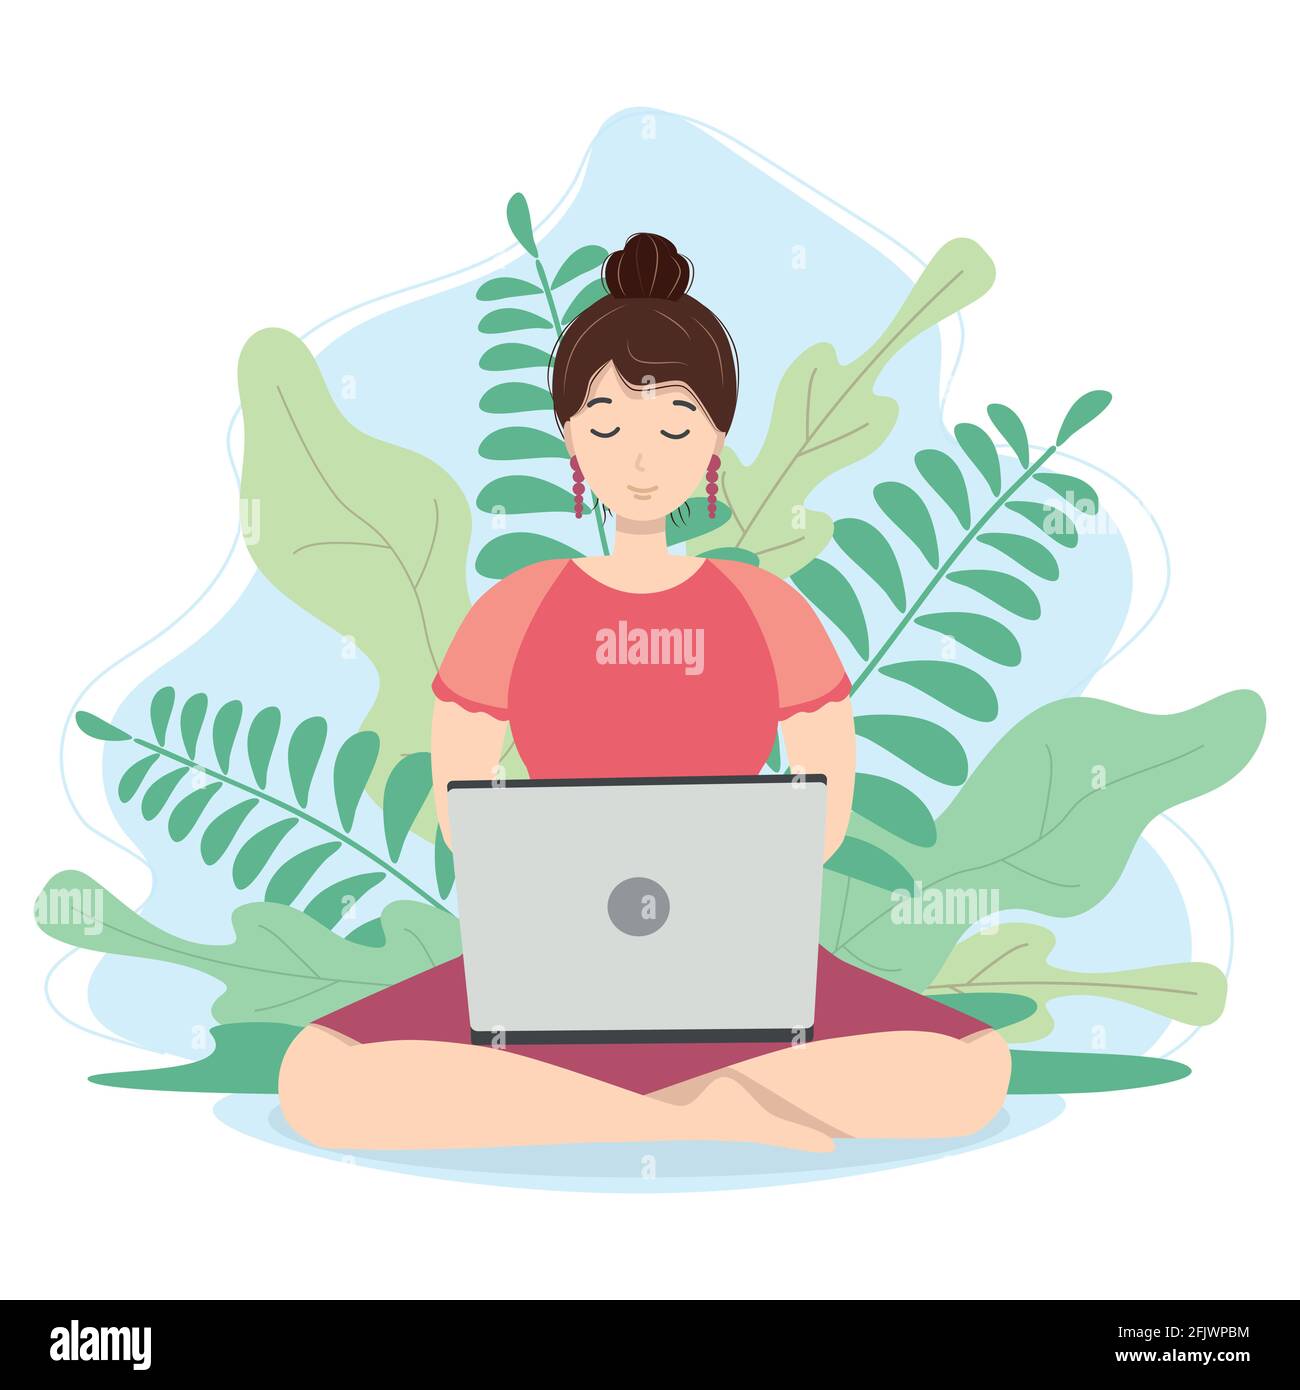 Woman with laptop sitting in nature and leaves. Concept illustration for working, freelancing, studying, education, work from home. illustration in fl Stock Vector